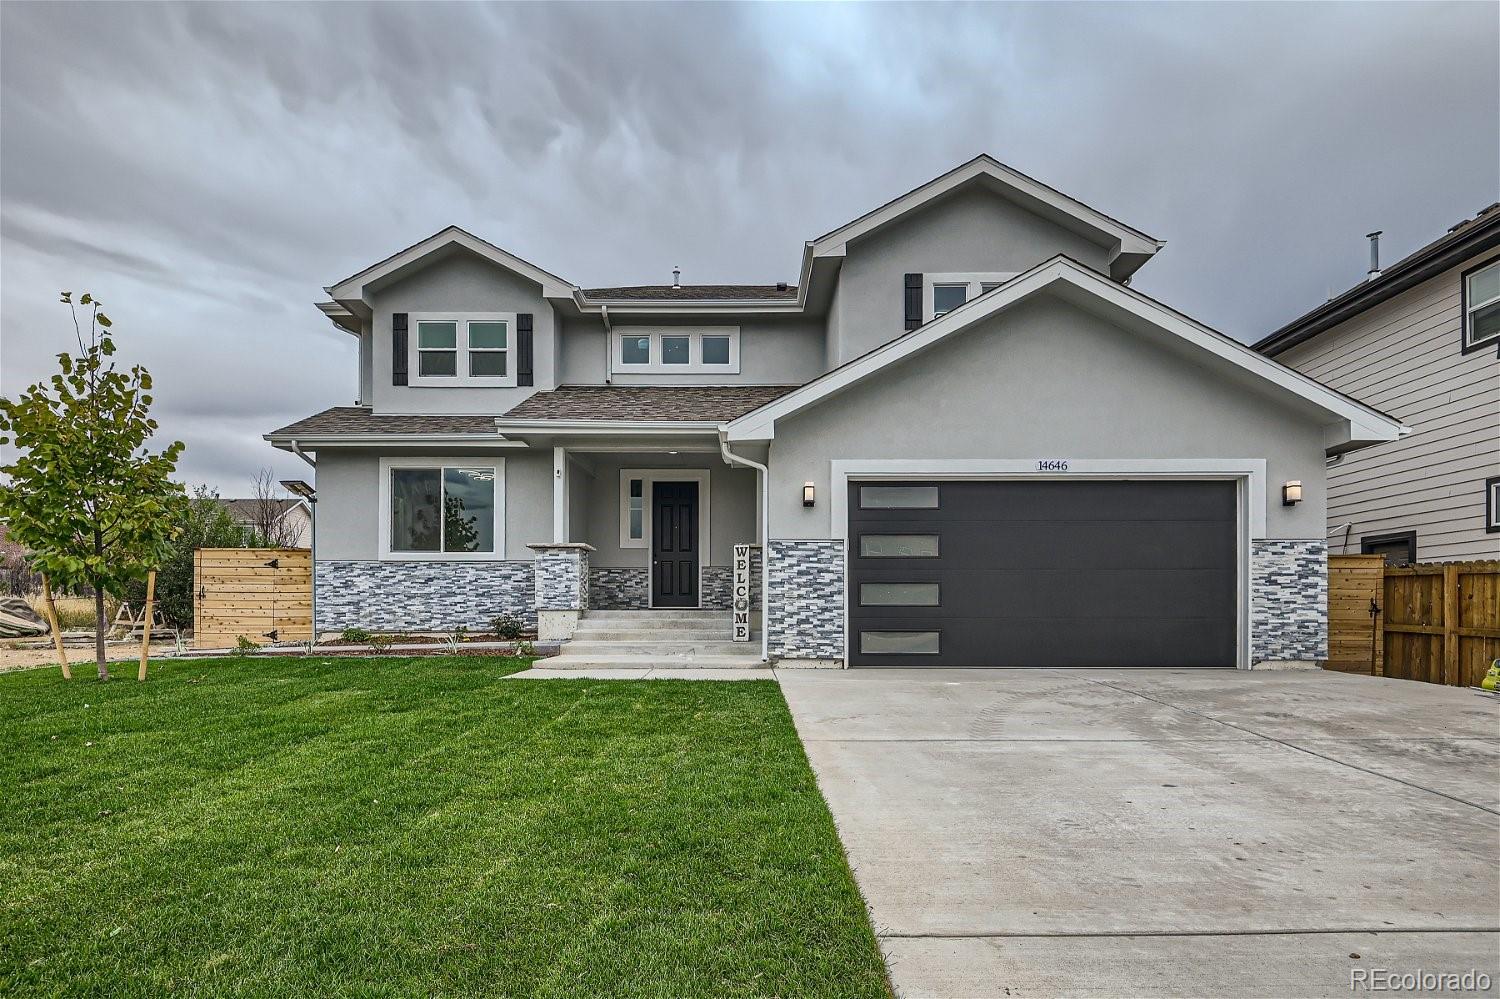 14646 e 26th place, aurora sold home. Closed on 2024-03-13 for $715,000.